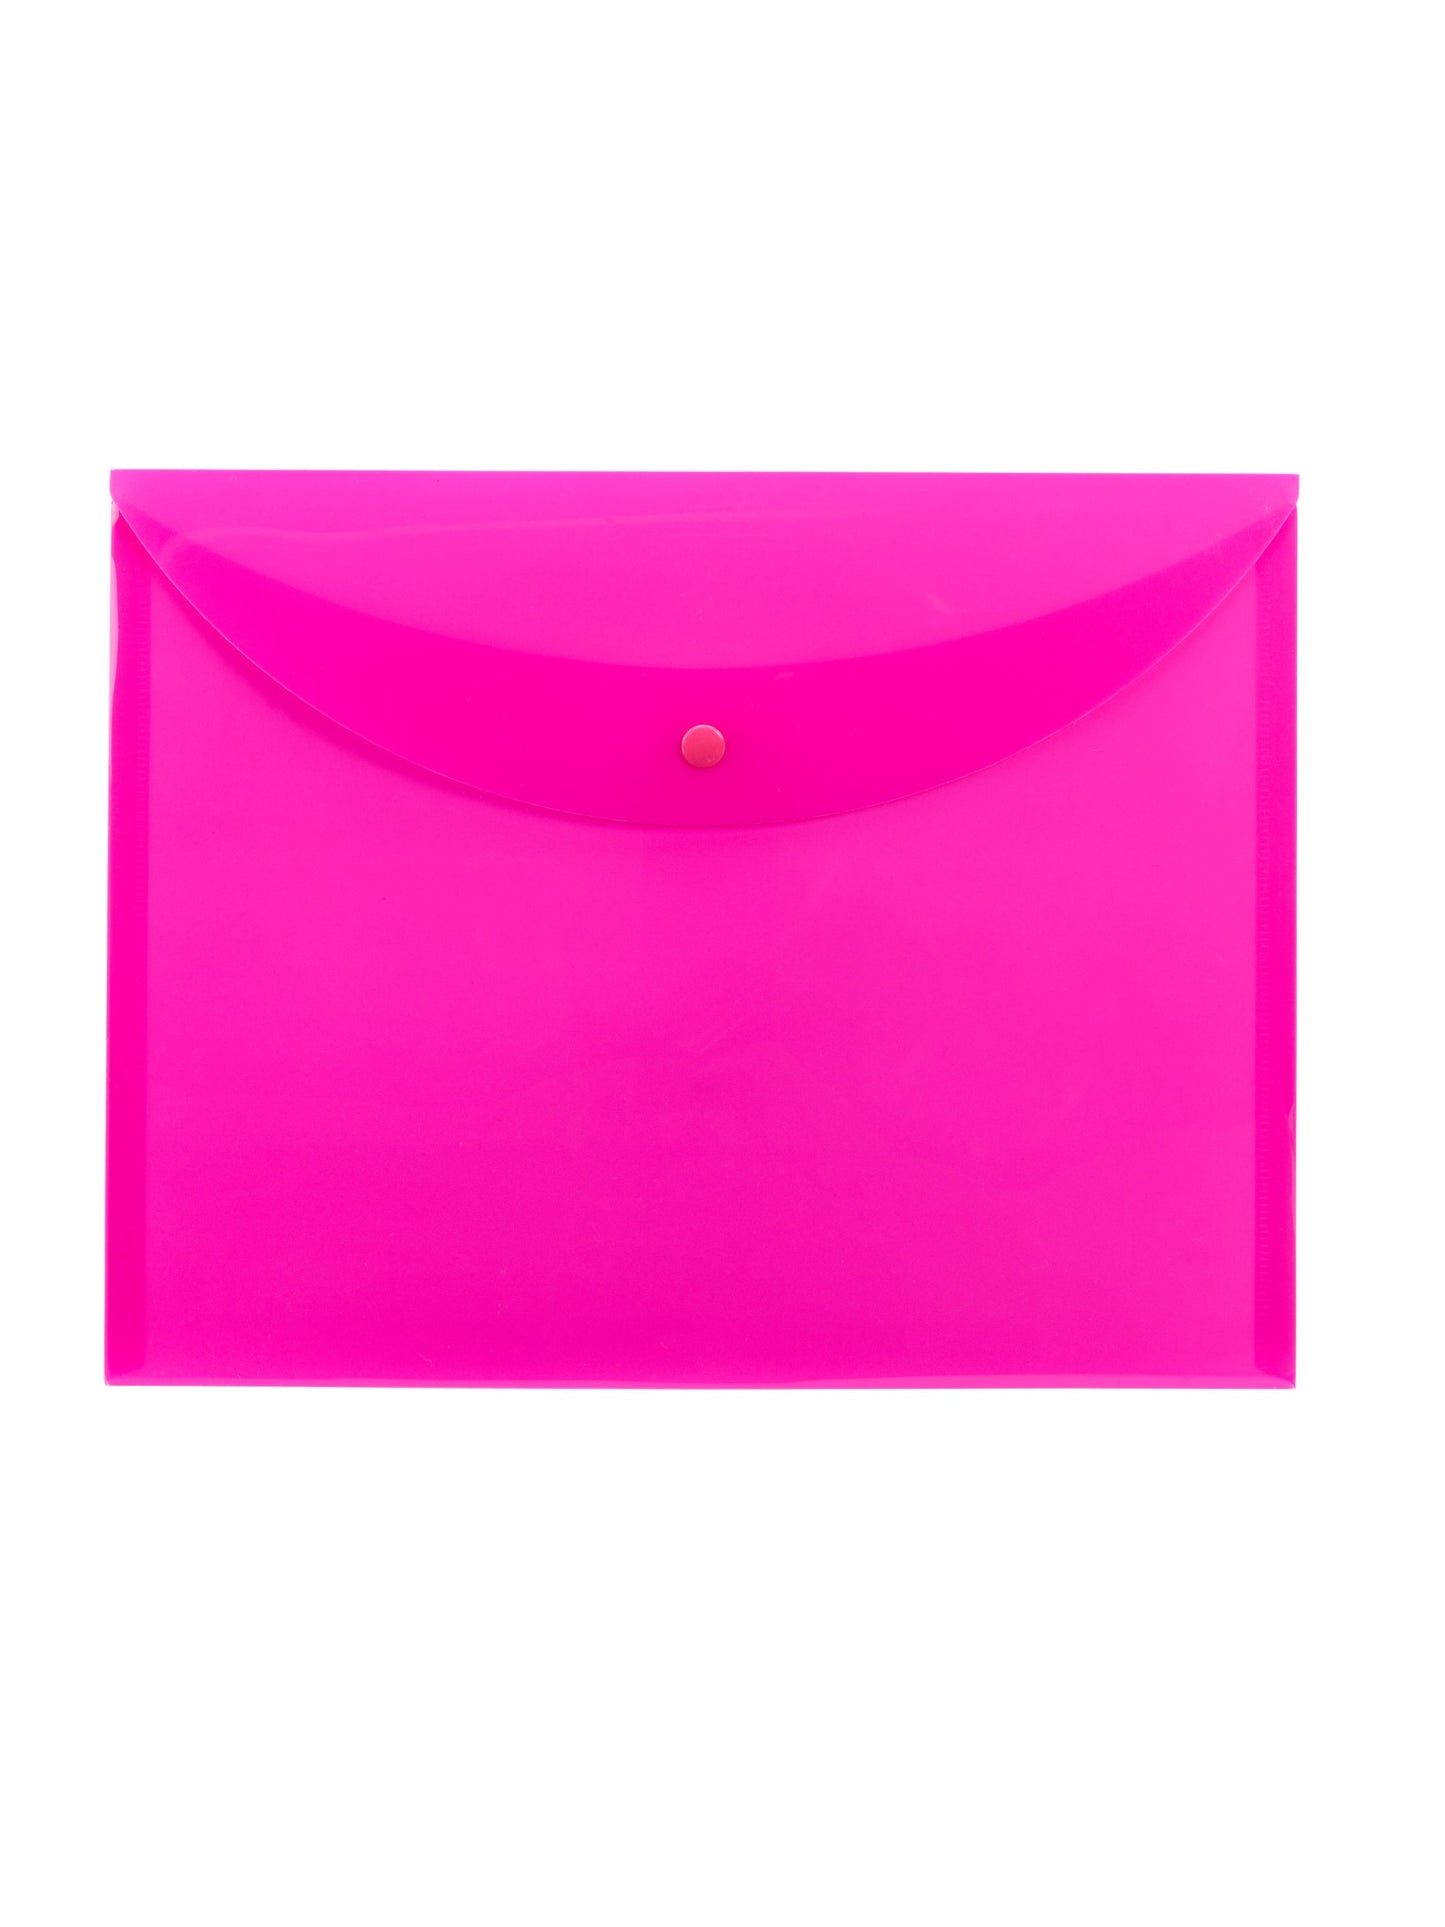 Poly Document Holders, Pink Color, Letter Size, Set of 10, 086486896825